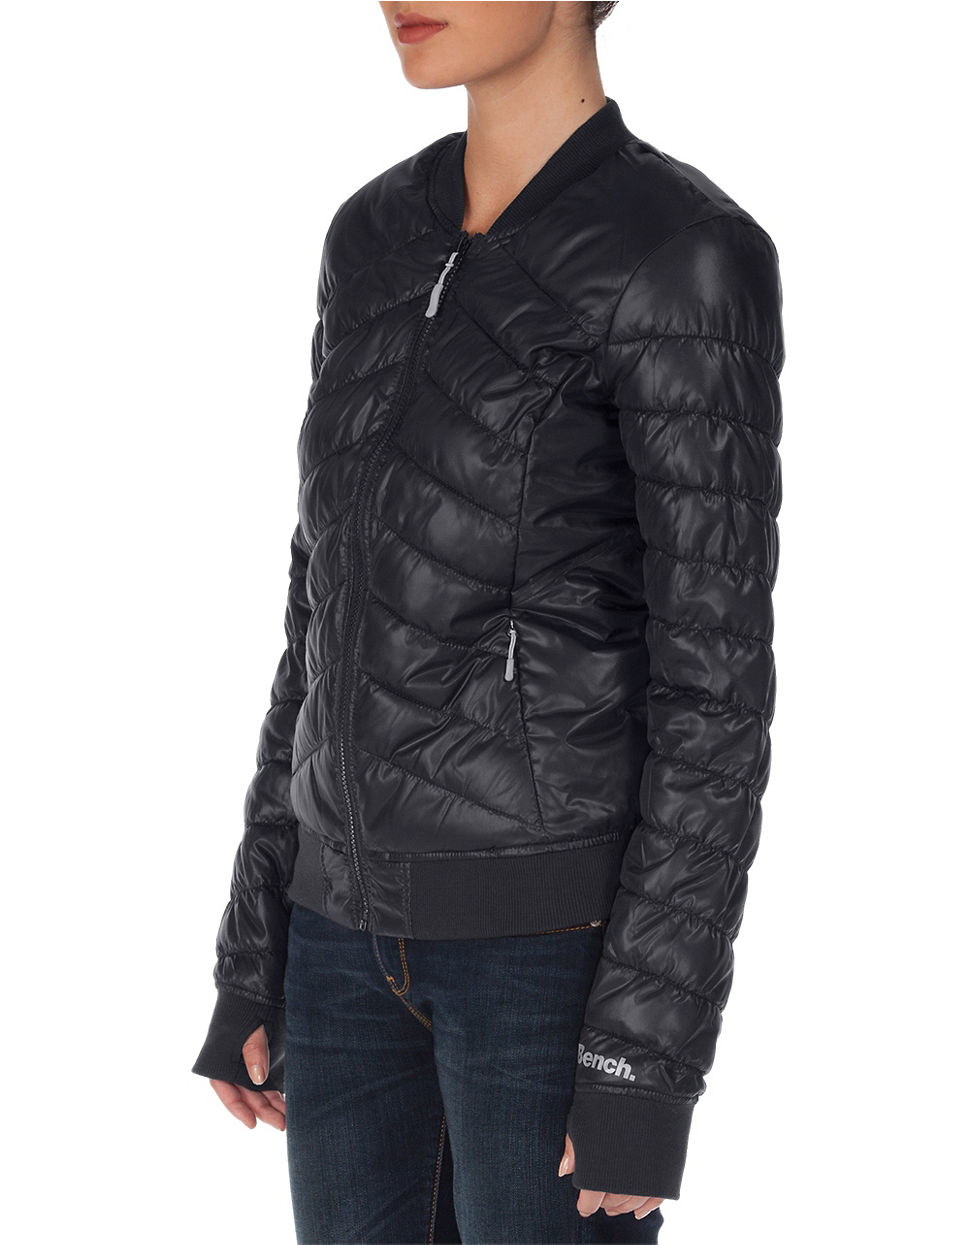 Bench Puffer Thumb-hole Bomber Jacket in Black | Lyst